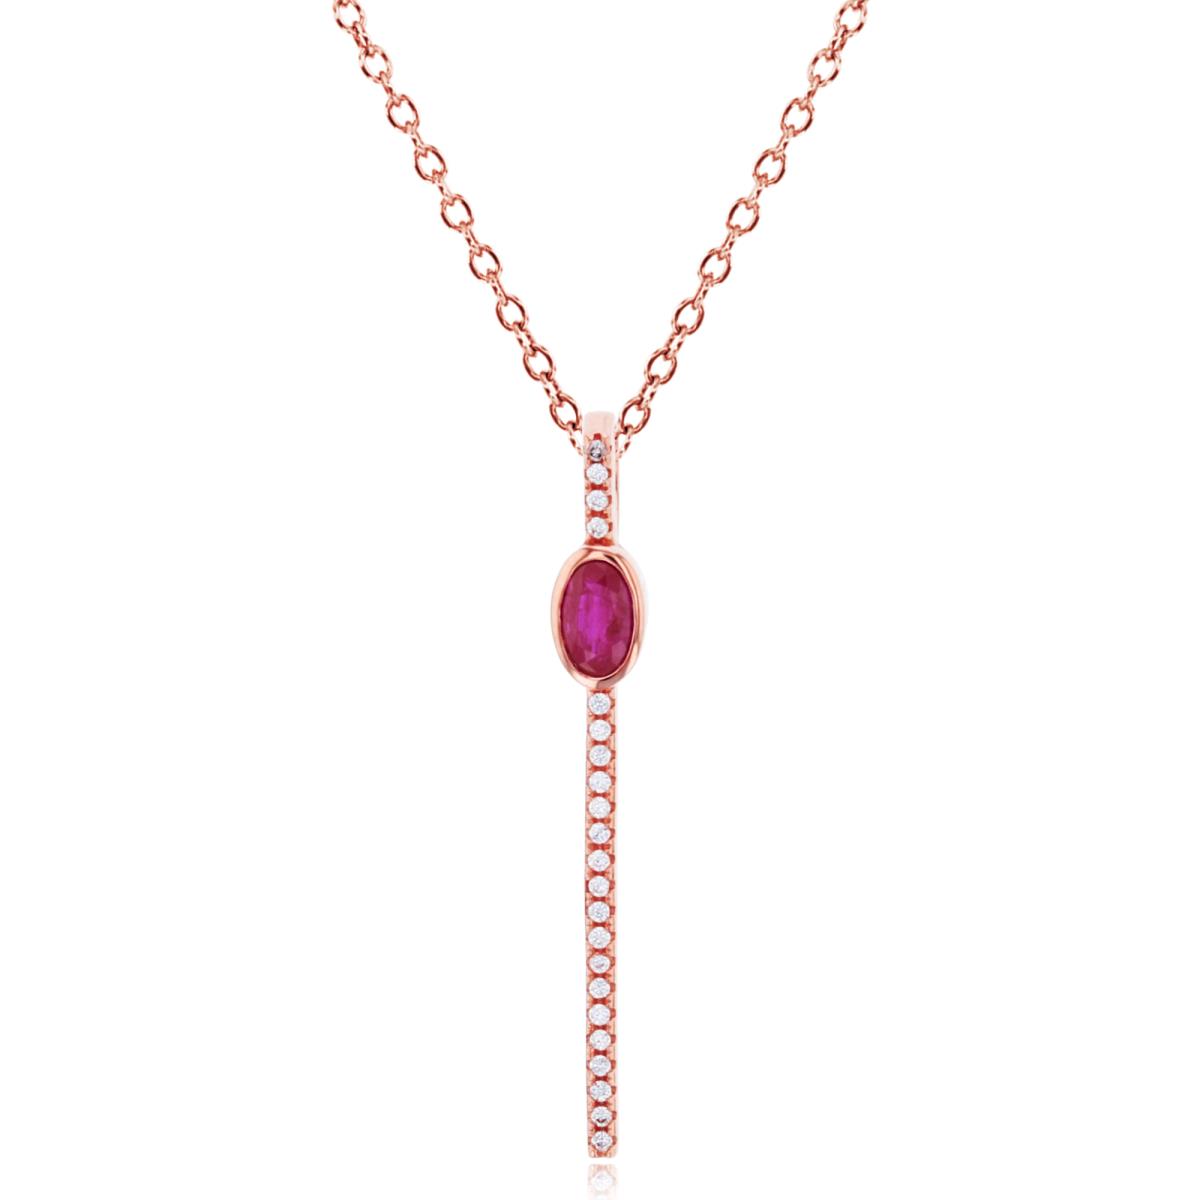 10K Rose Gold & 5x3mm Cr. Ov Ruby & Cr. Rd White Sapphire 18" Necklace